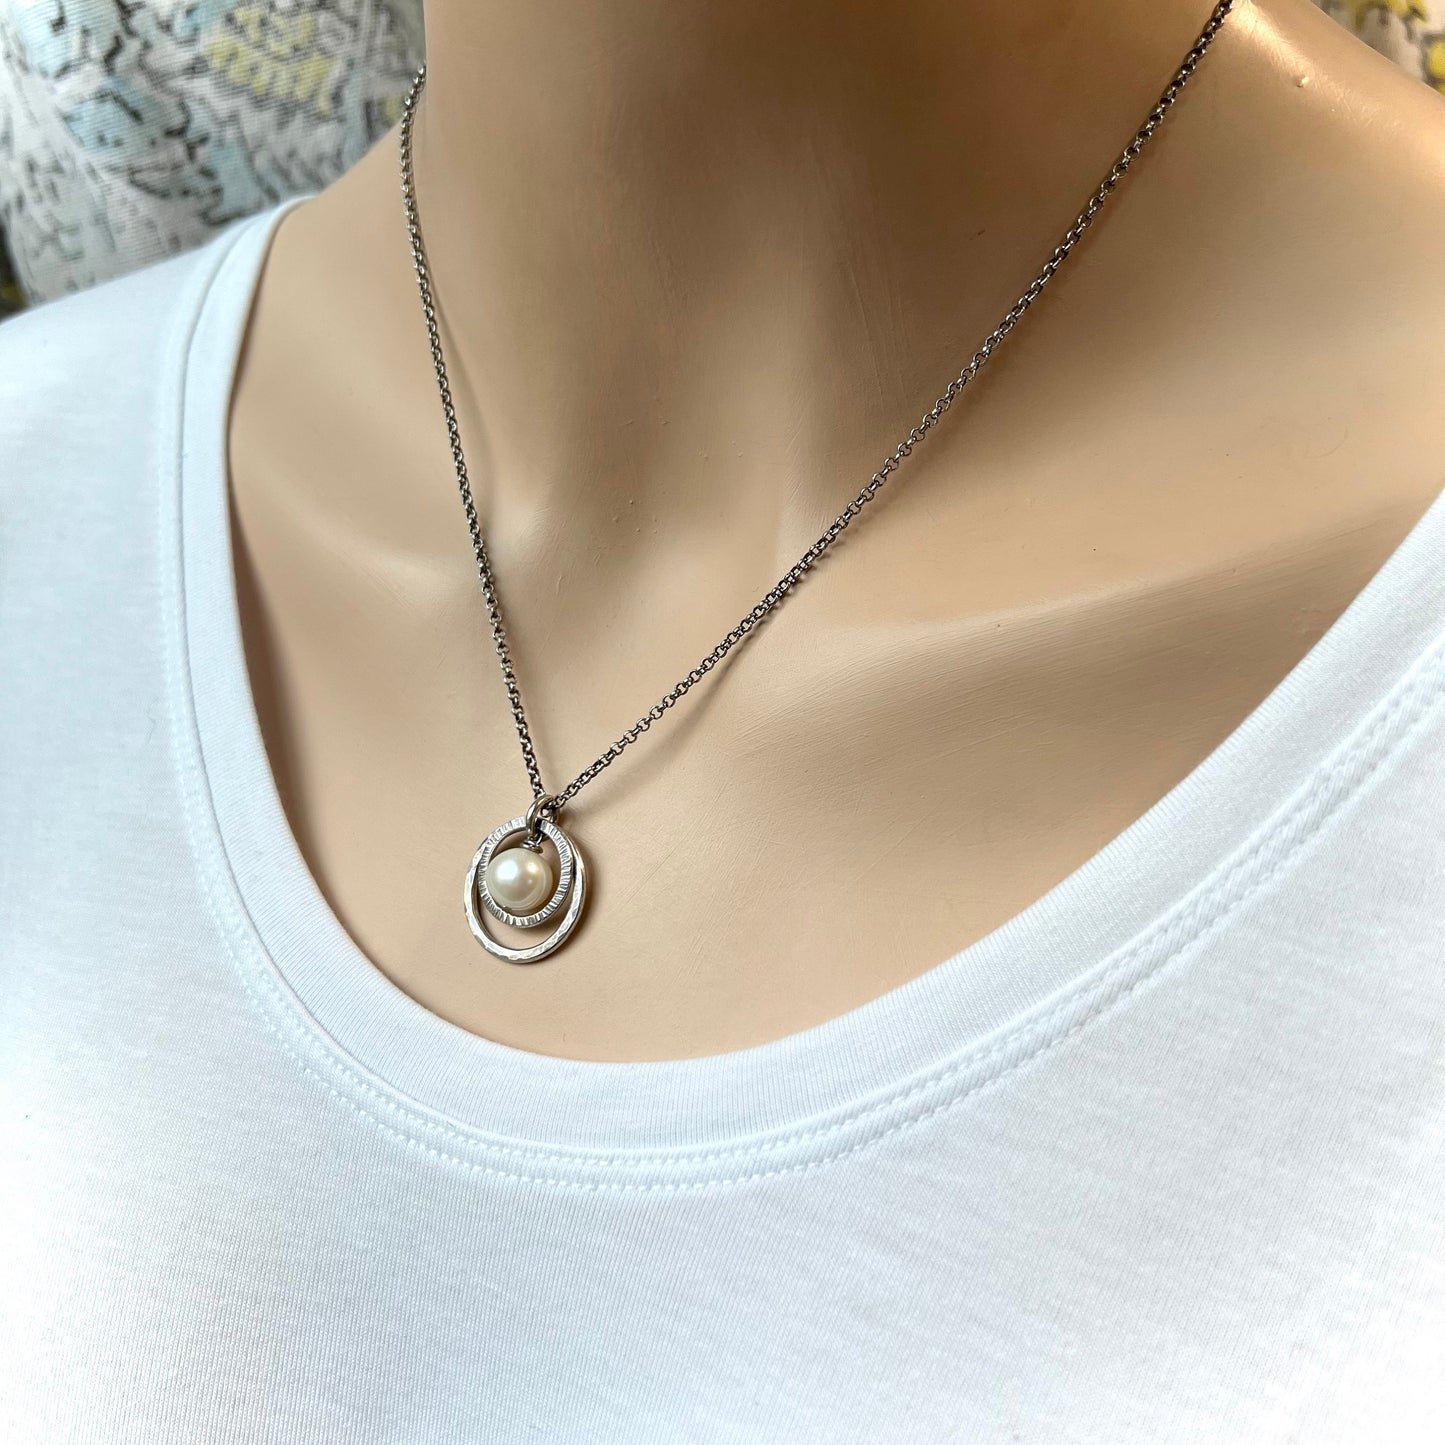 Silver Pearl Necklace - Genuine Freshwater Pearl in Sterling Silver Rings Pendant on Sterling Silver Chain